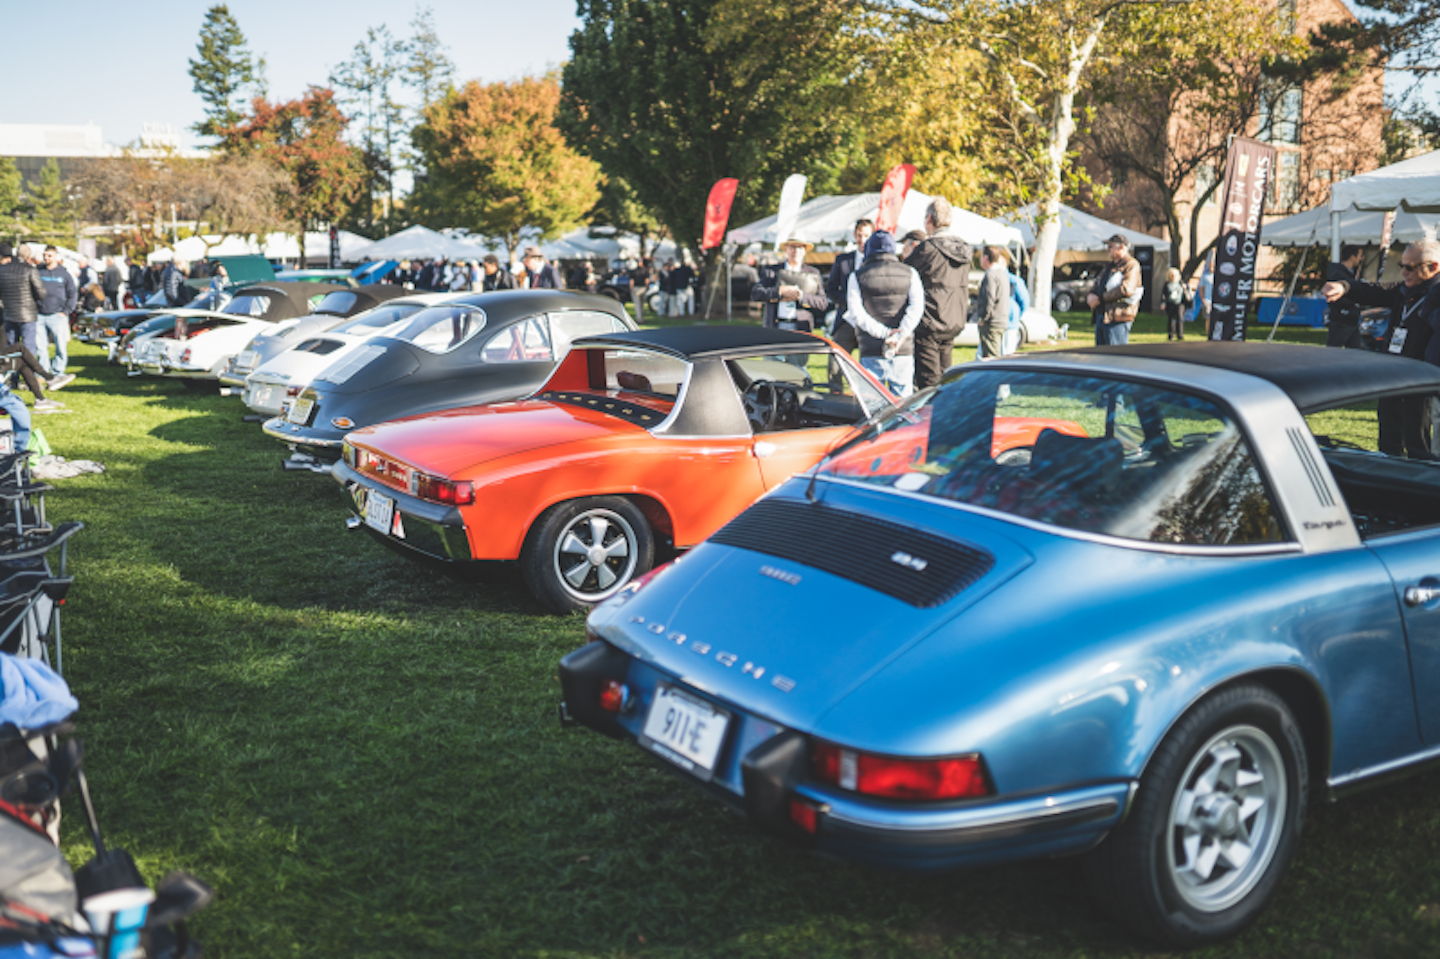 Porsche and other classic cars on display at Canada car show.